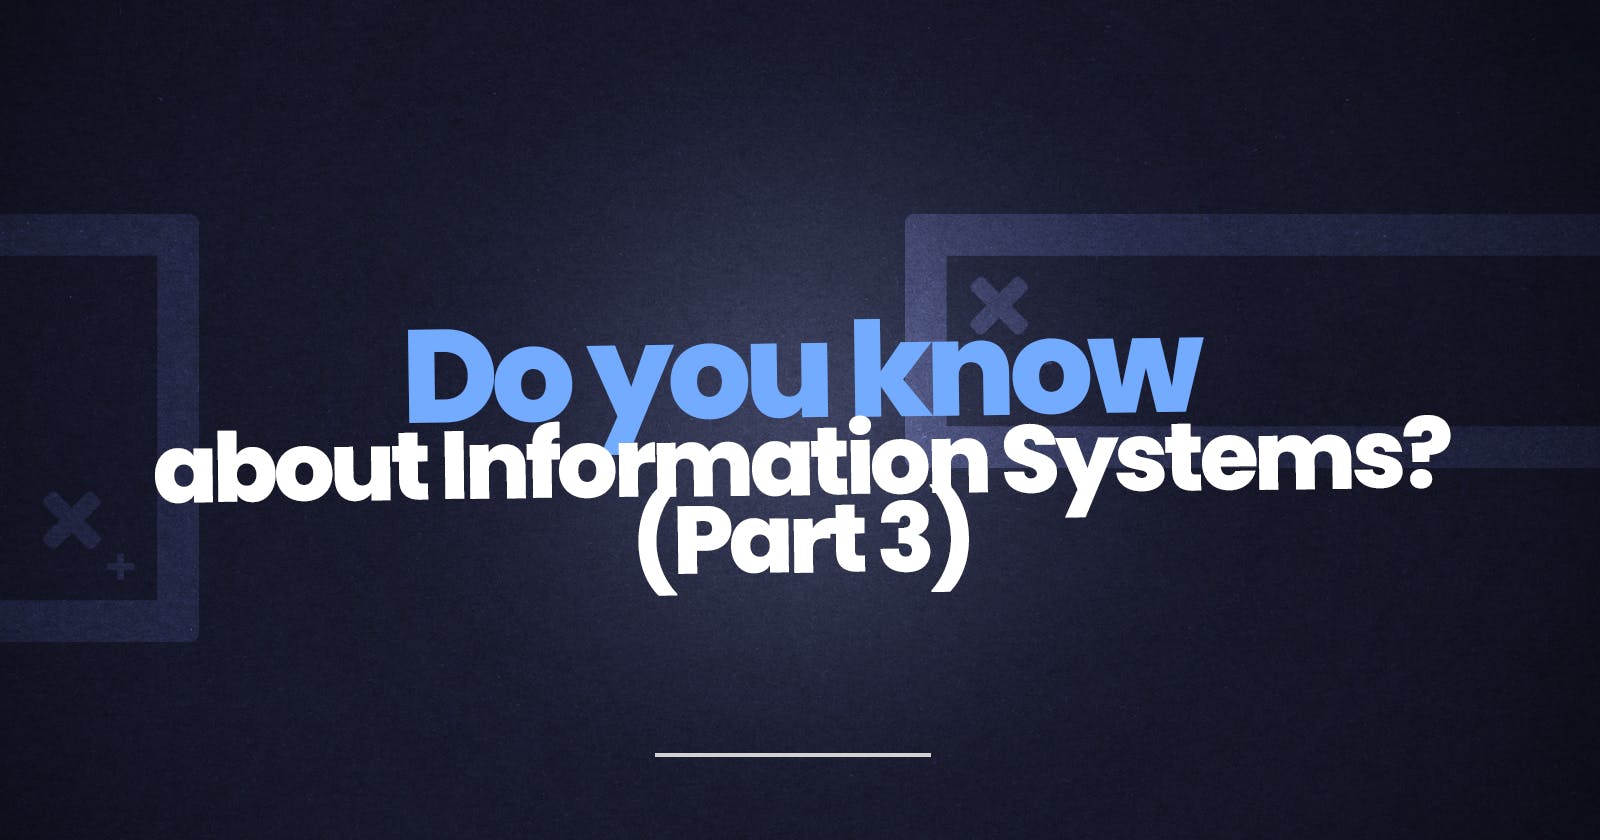 Do you know about Information Systems?(Part 3)